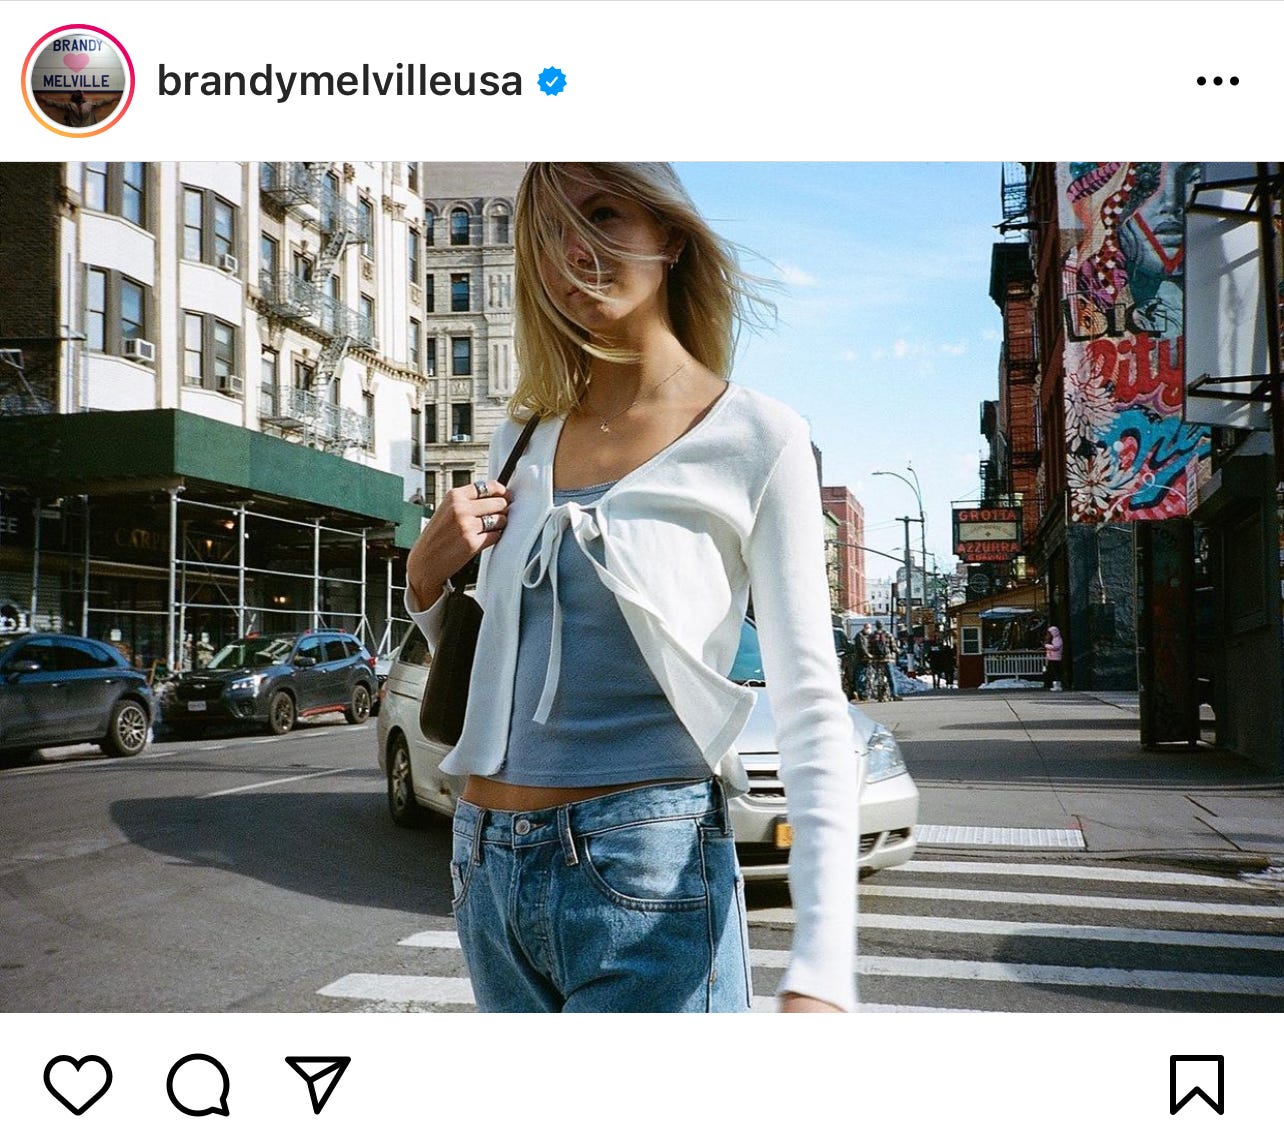 Brandy Melville :the “one size fits all ” brand, by Sweet potato, Digital  Society